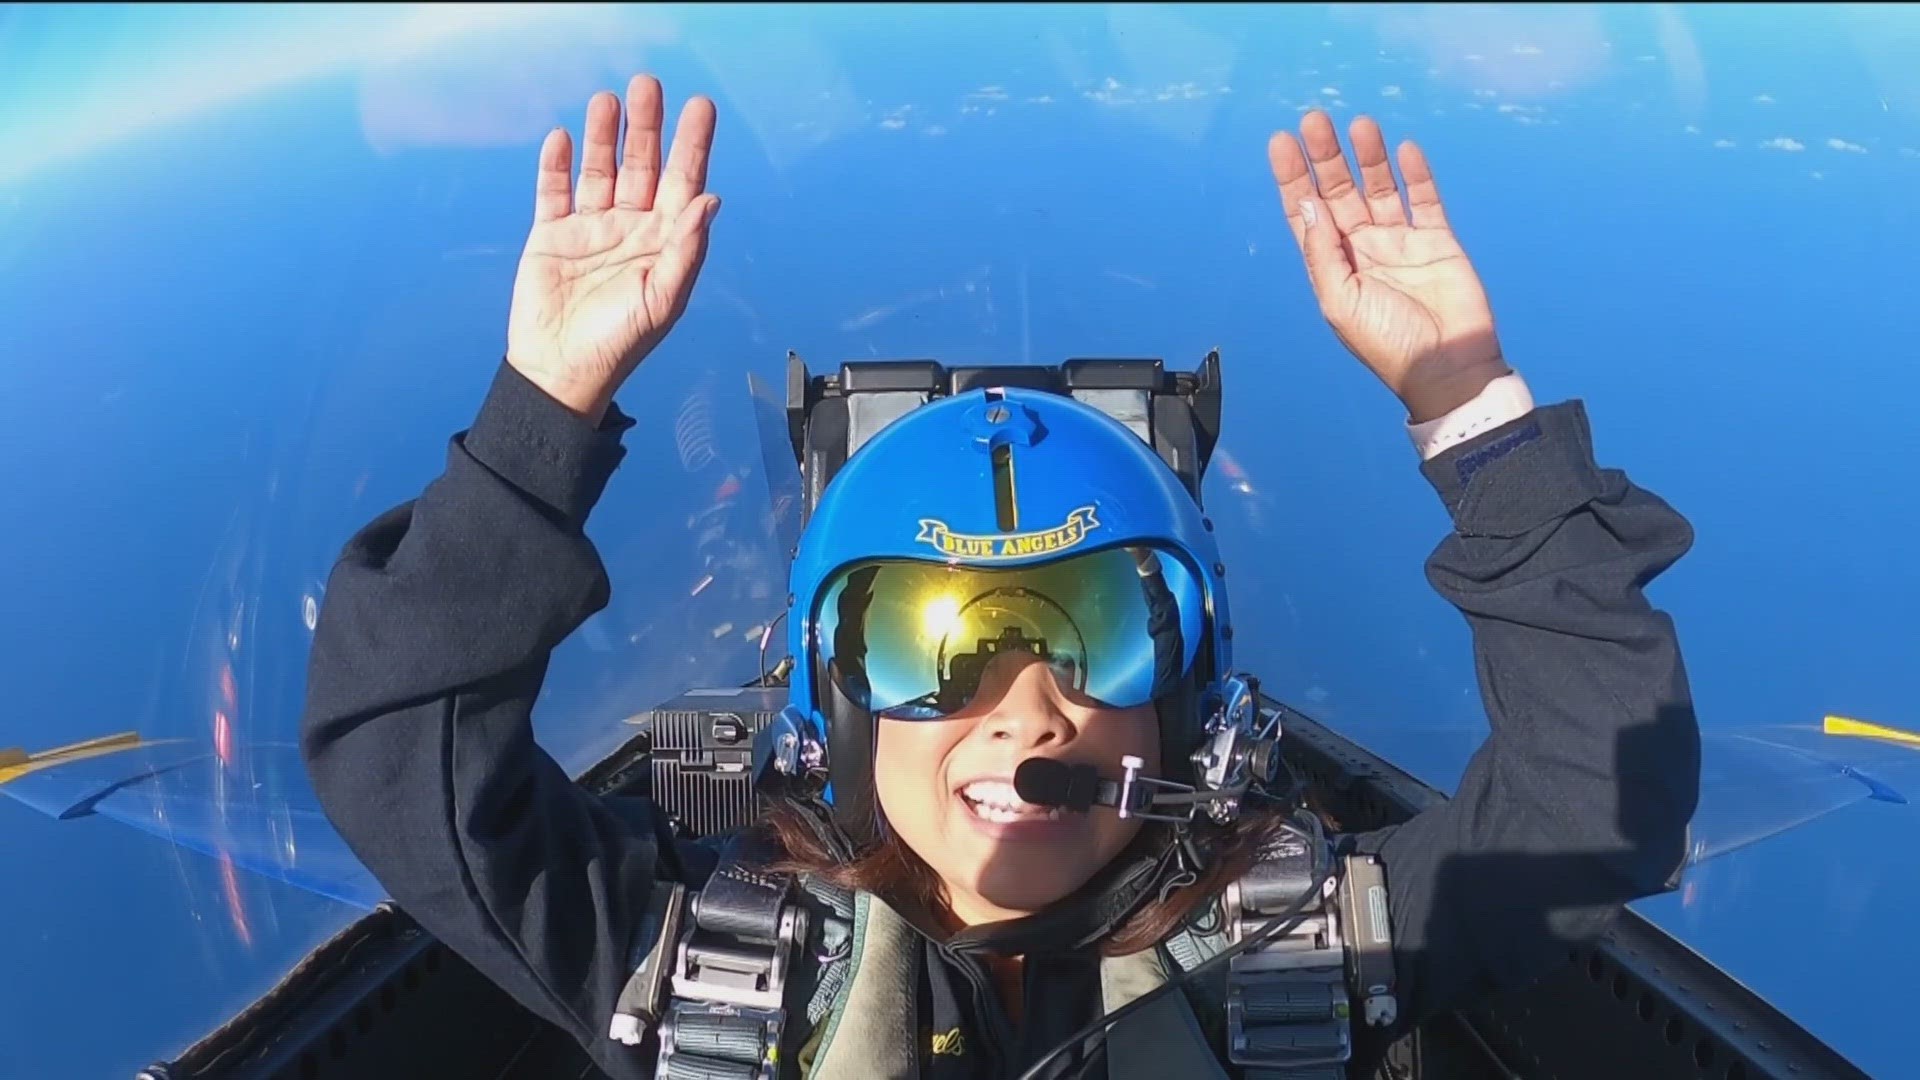 In 2022, CBS 8 anchor Marcella Lee had the privilege and honor of flying with the Blue Angels in an F/A-18 Super Hornet.